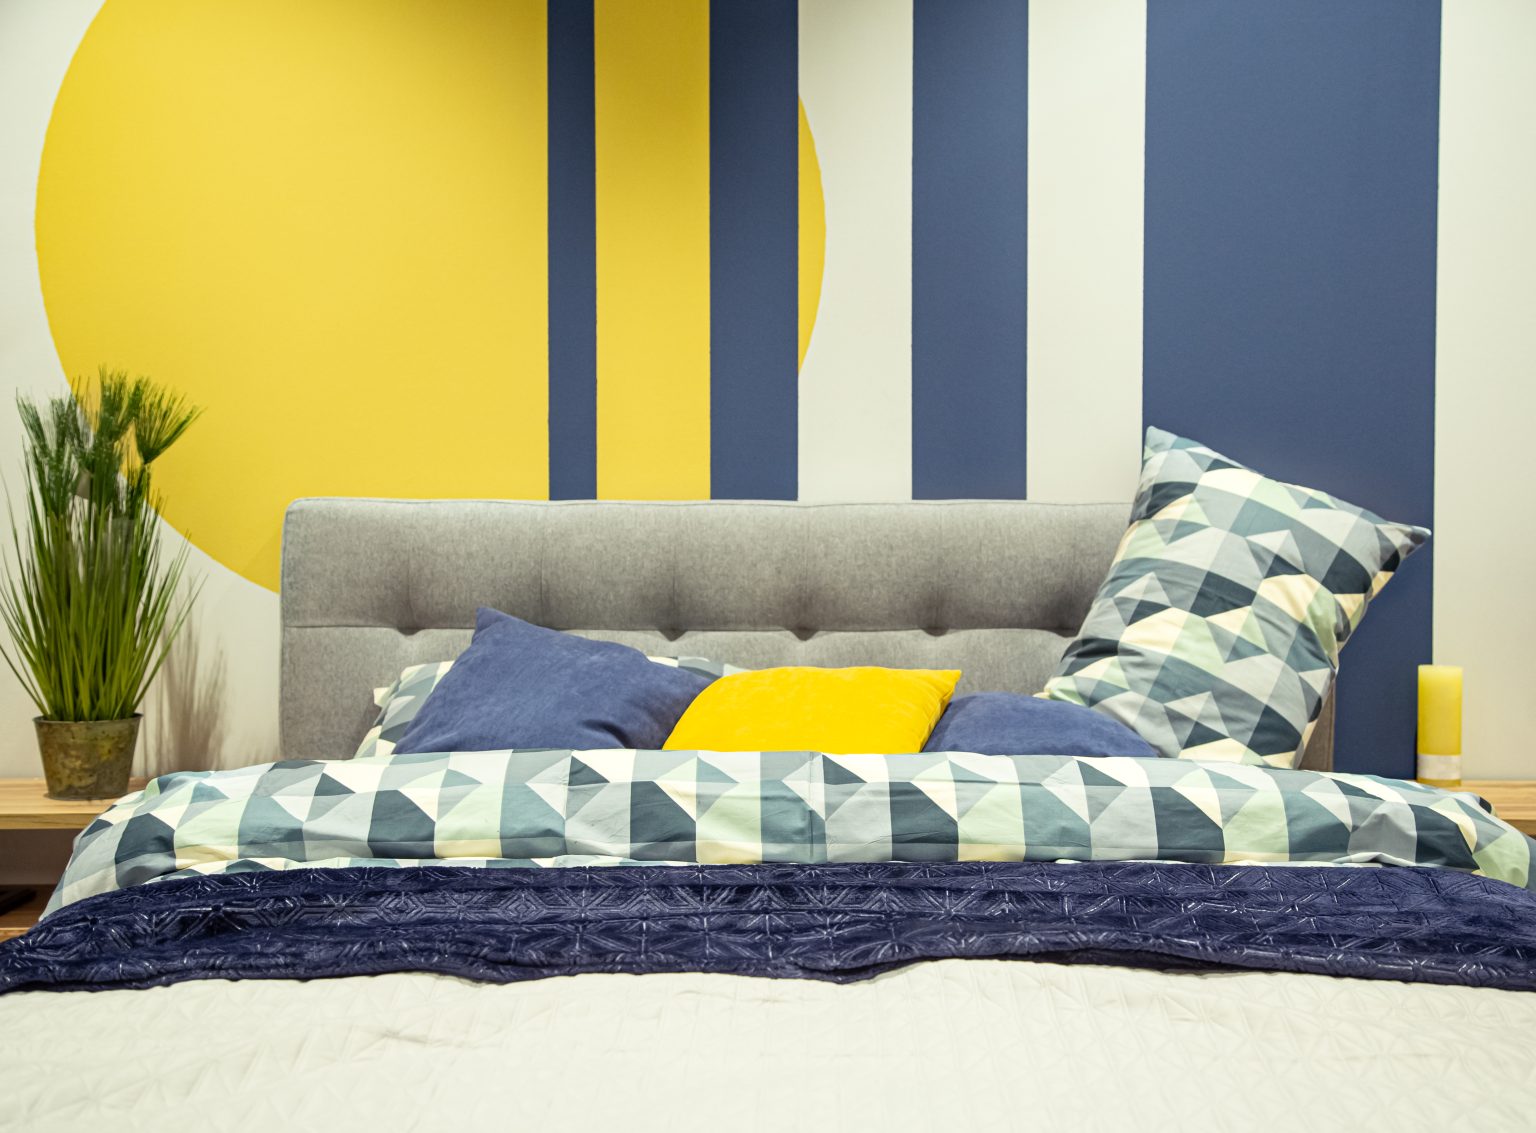 Modern bedroom interior in blue and yellow tones.